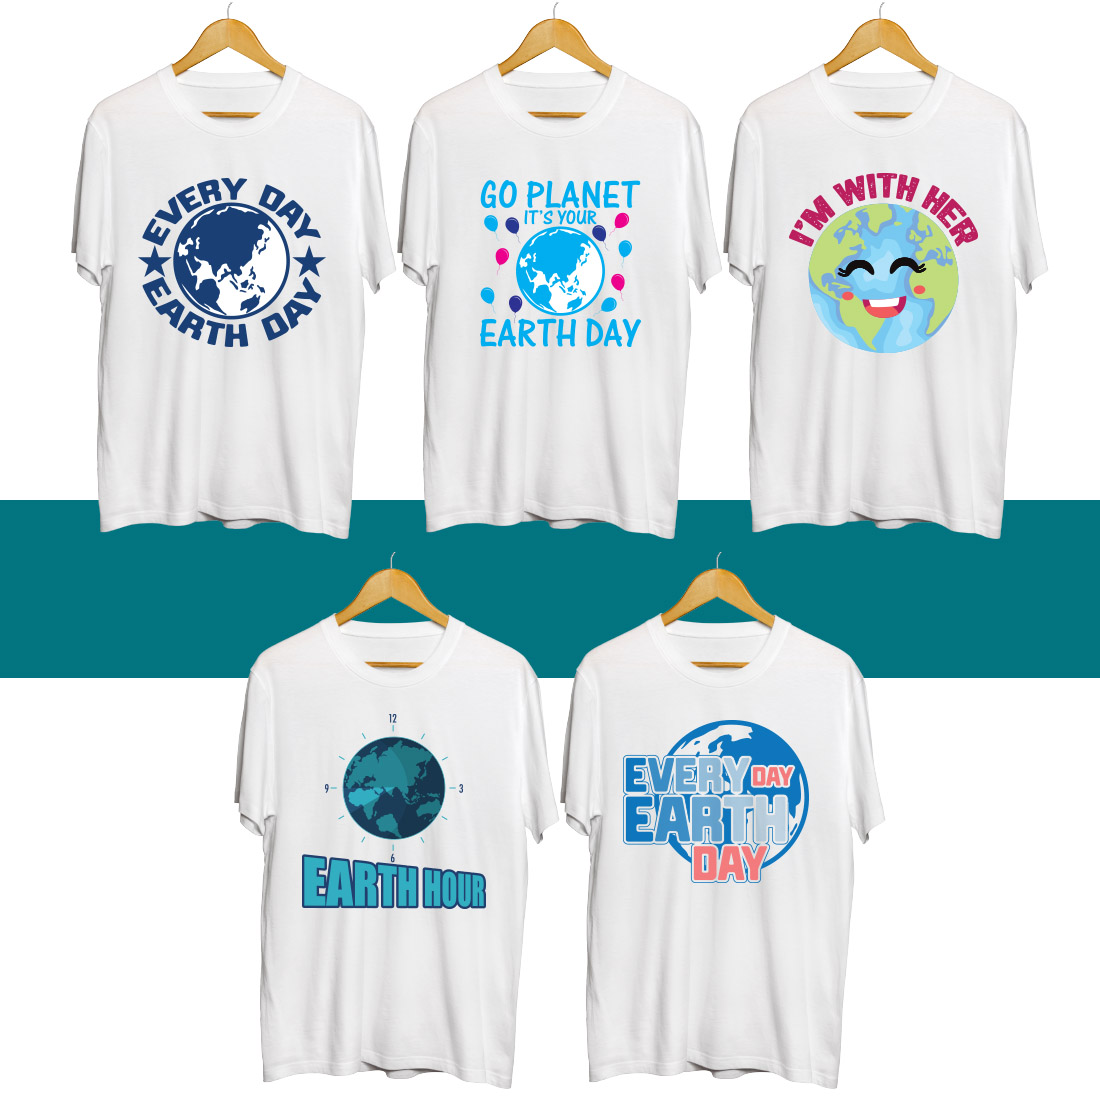 Four t - shirts with earth day designs on them.